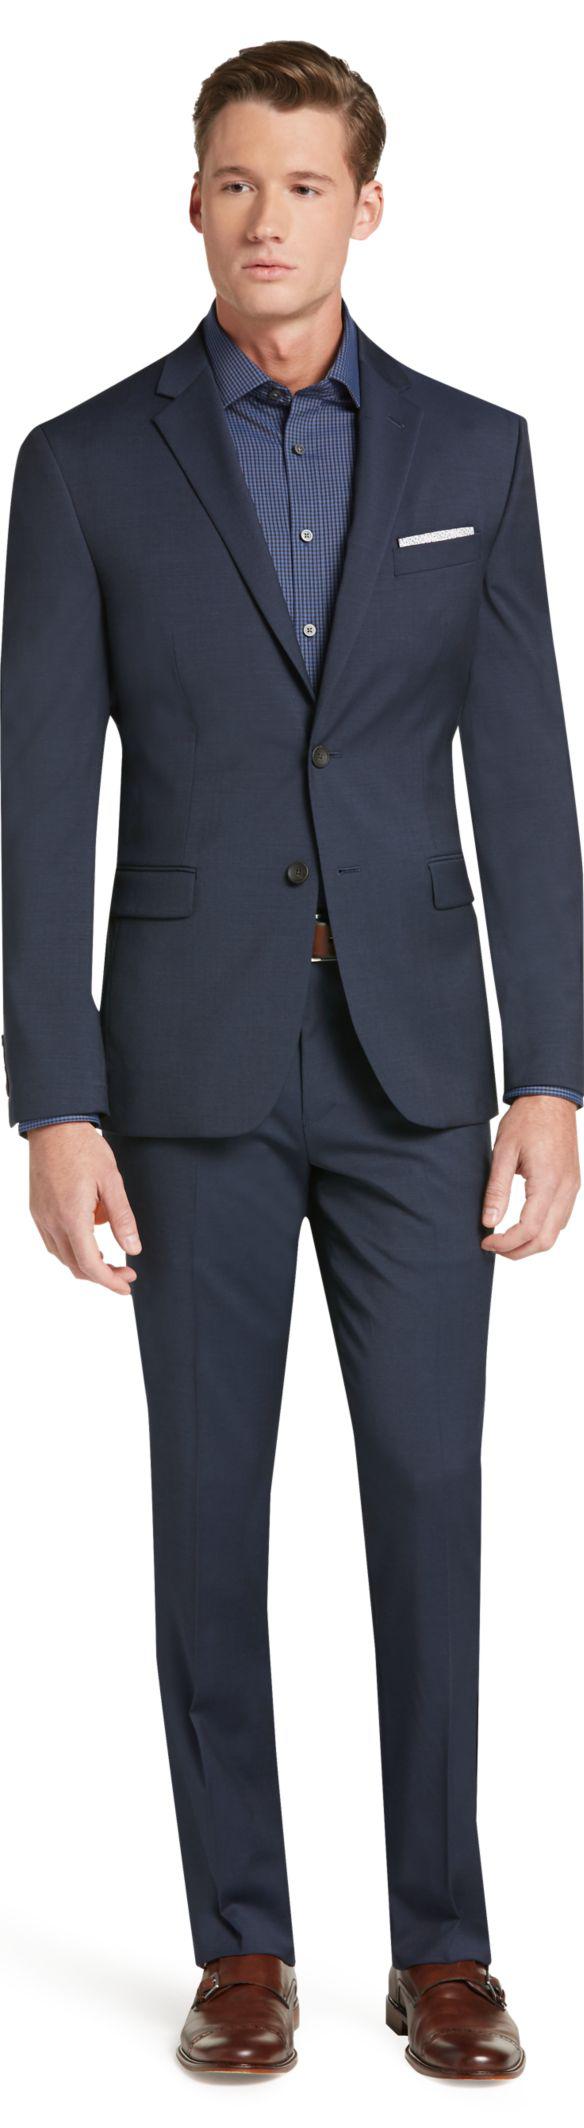 Lyst - Jos. A. Bank Travel Tech Slim Fit Suit Separate Jacket in Blue ...